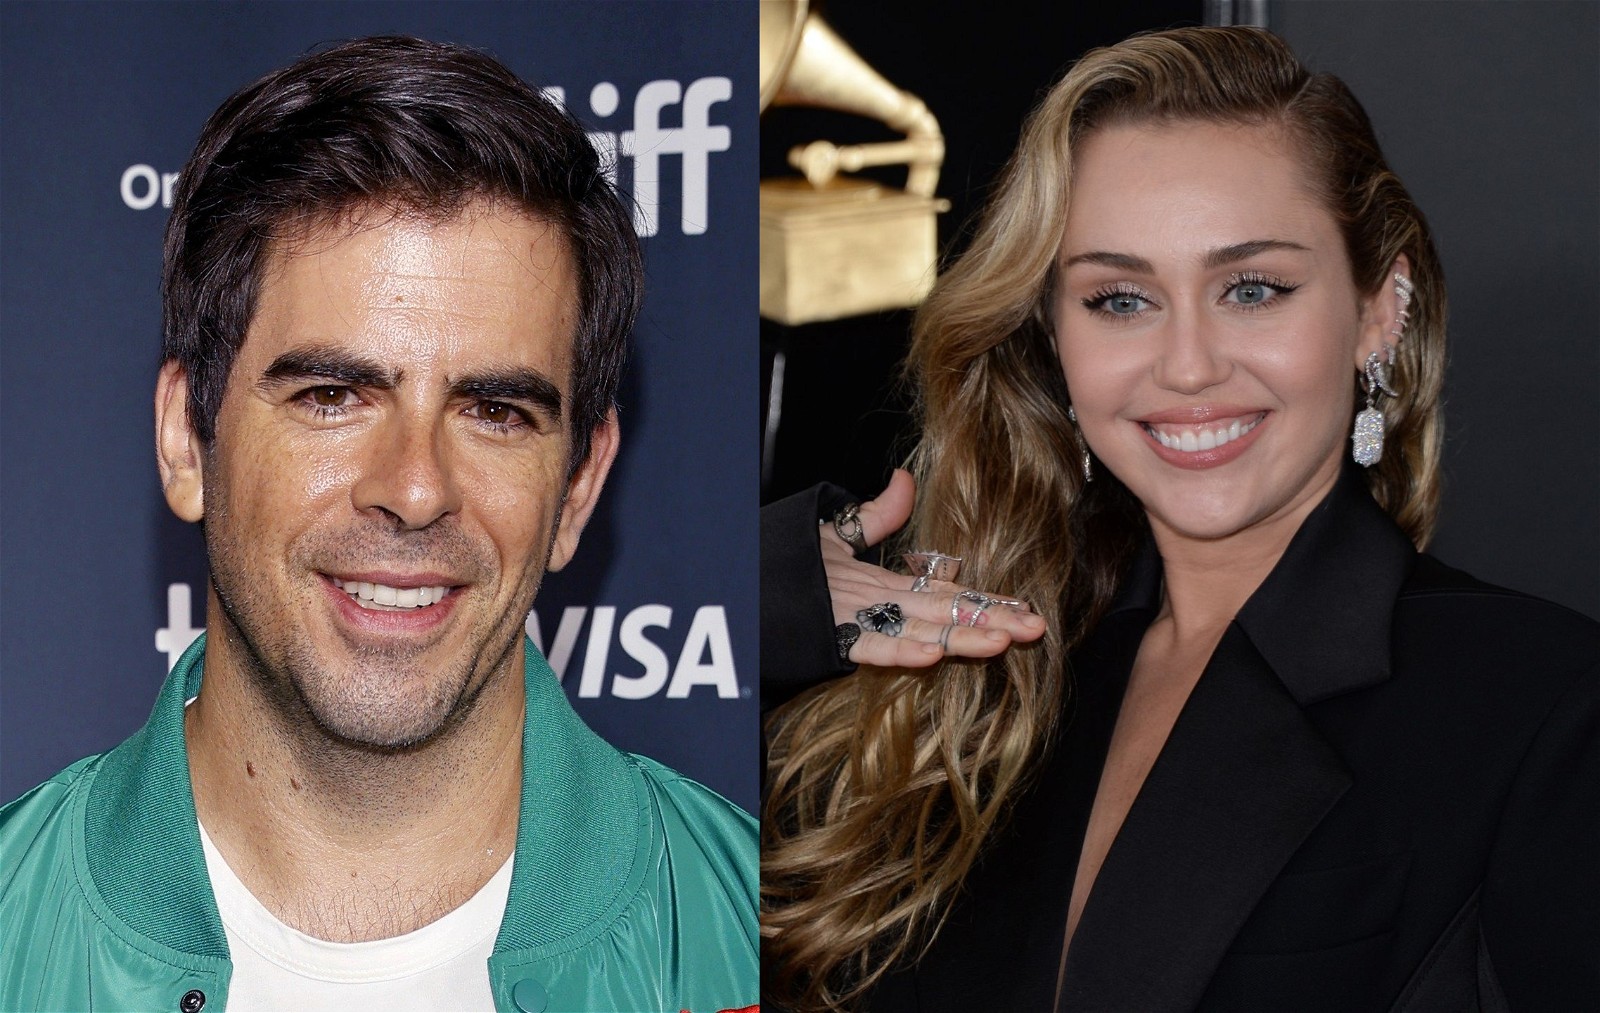 Miley Cyrus' music helped Eli Roth to embody his Inglourious Basterds role